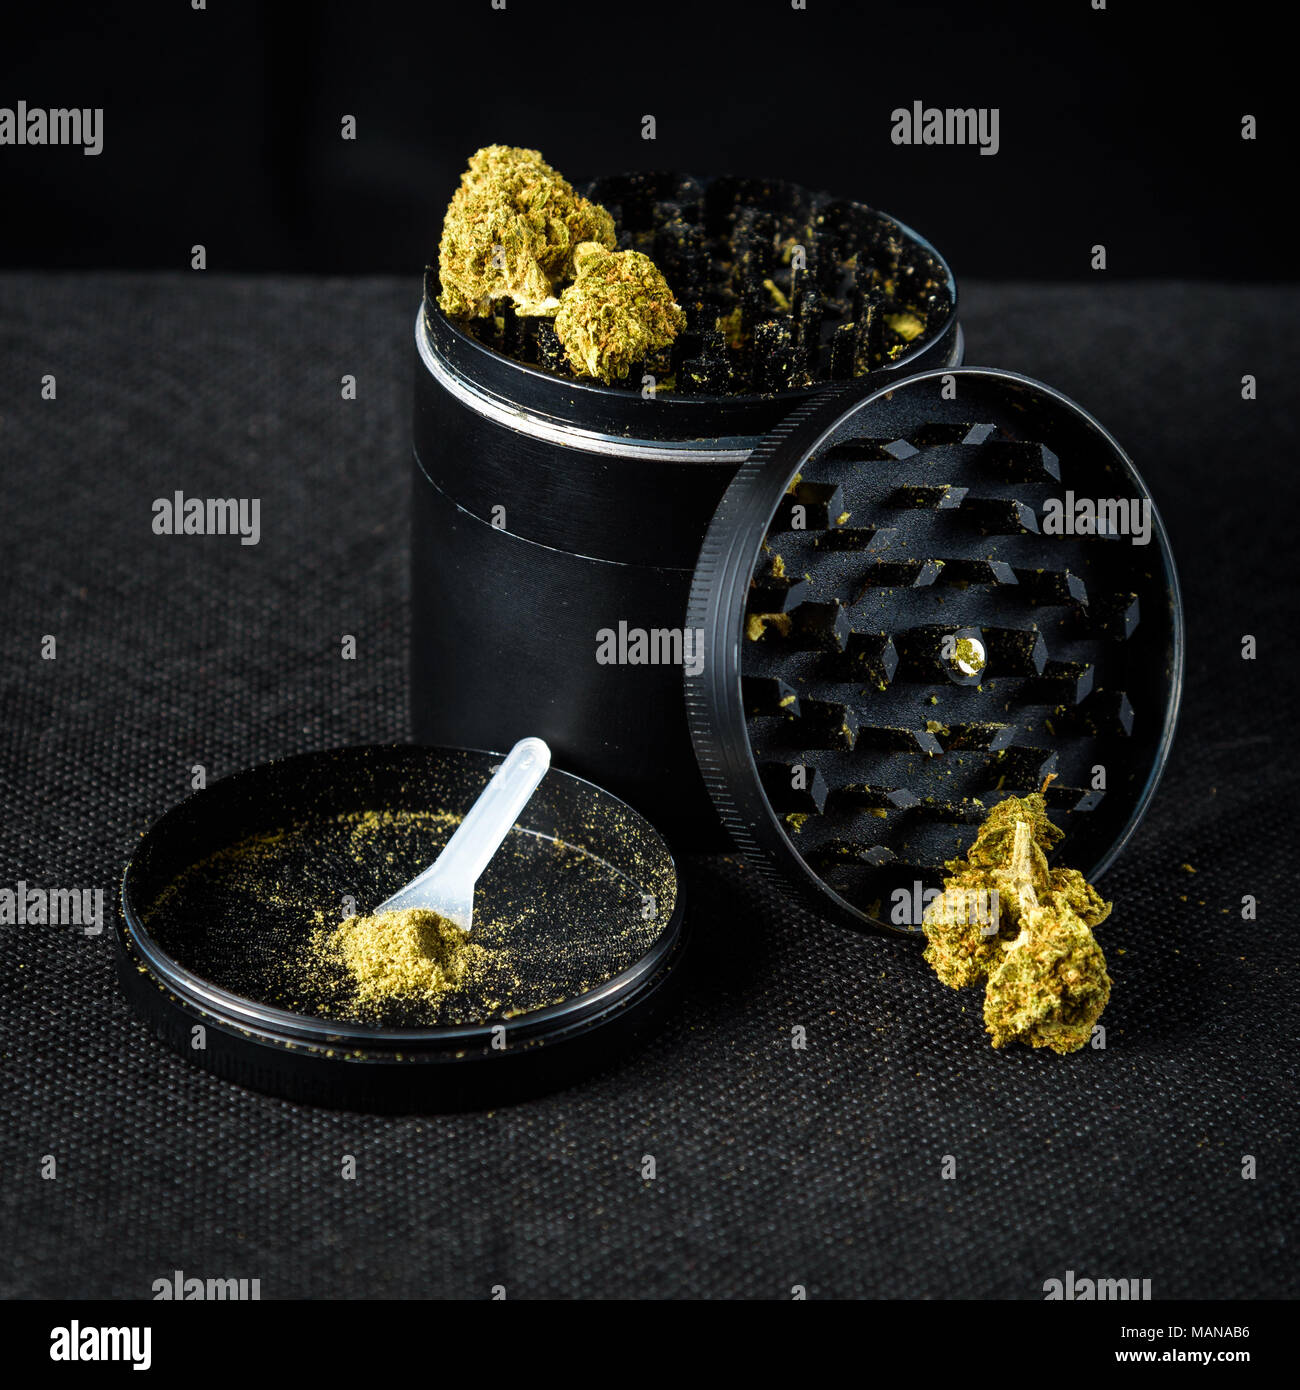 A medicinal marijuana grinder with keef and scraper. Black background Stock Photo